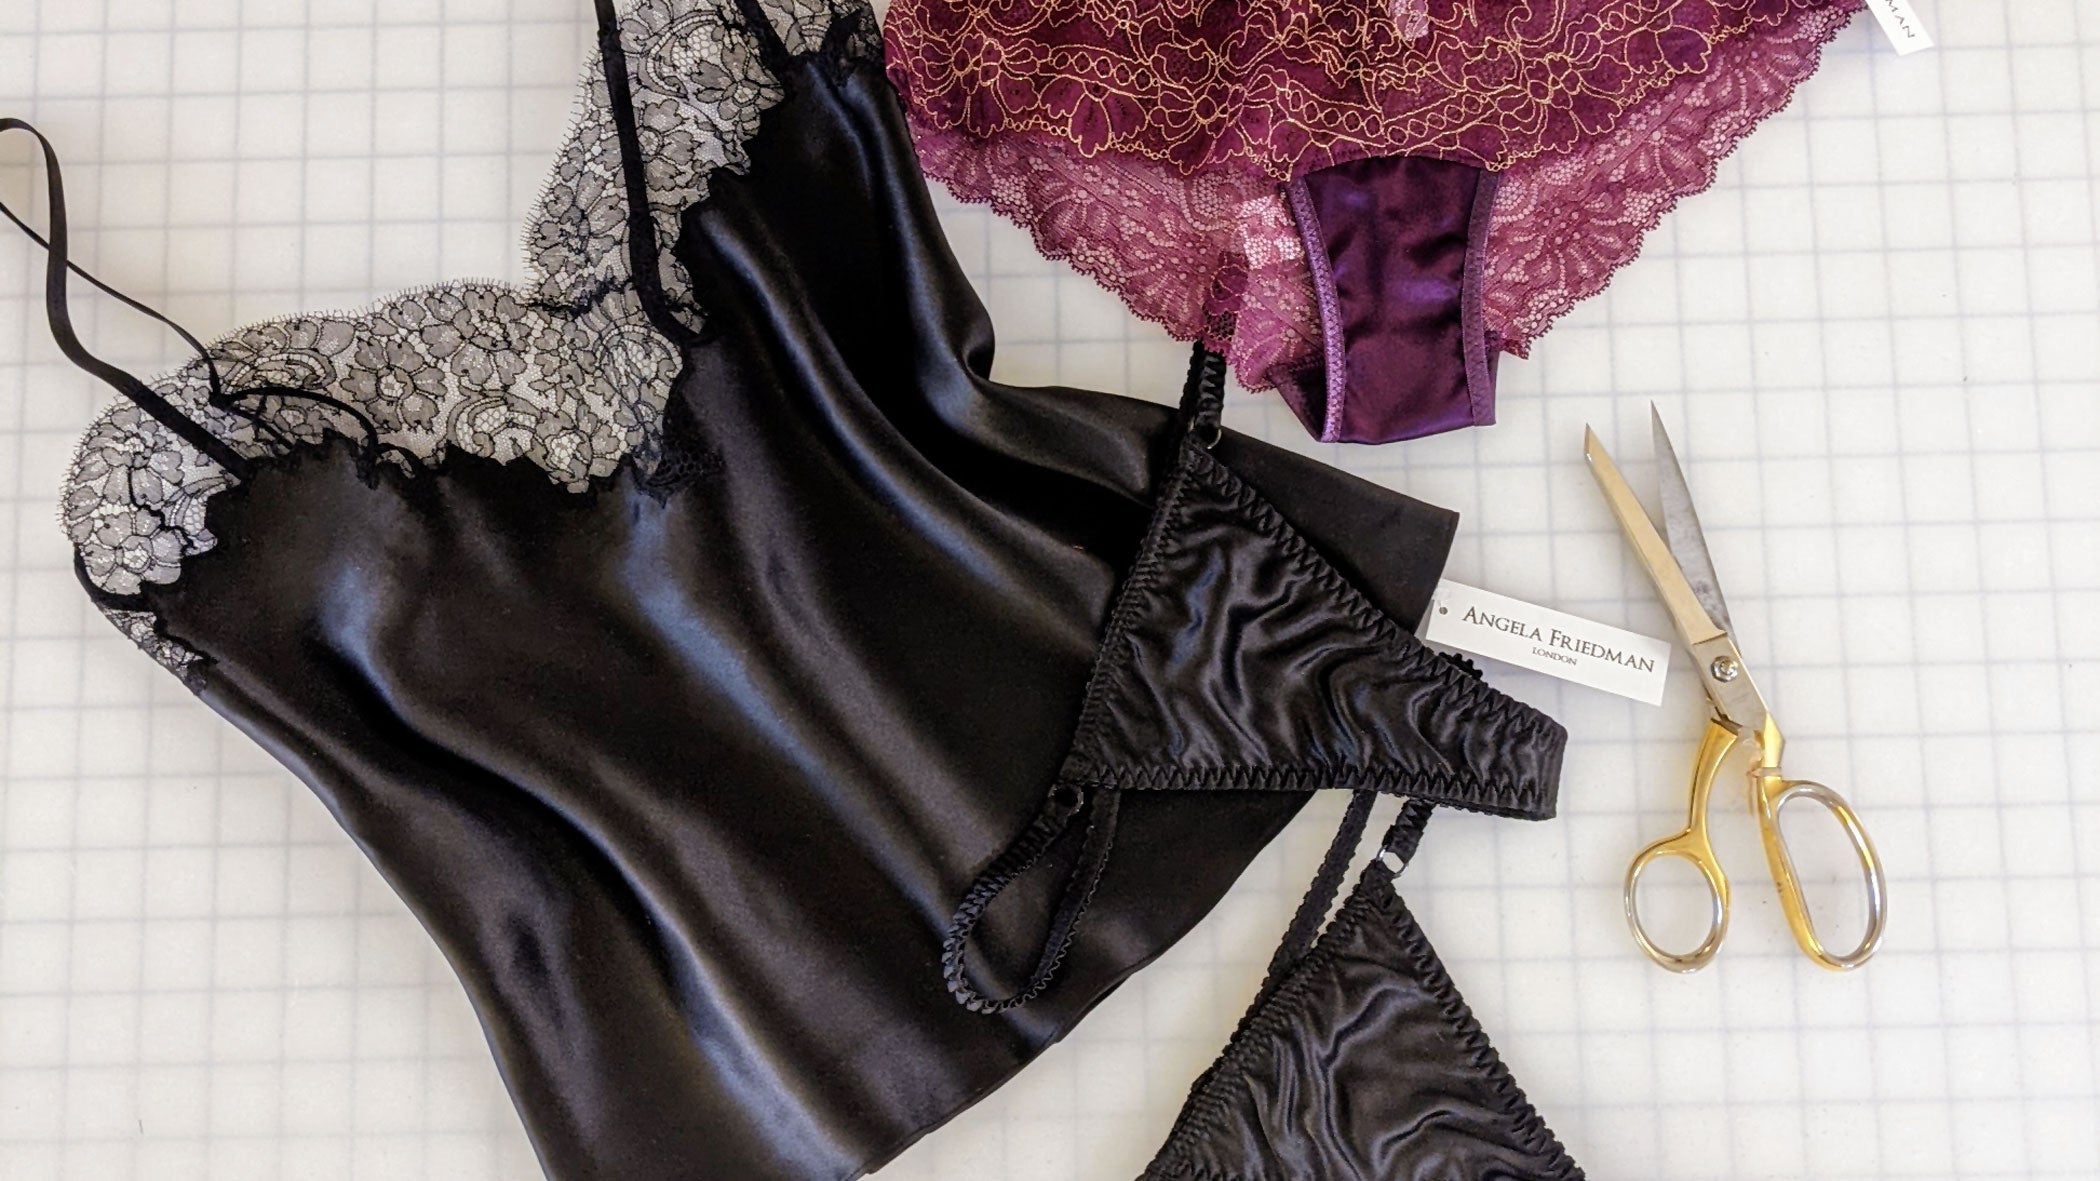 Behind the scenes of sewing sustainable silk lingerie